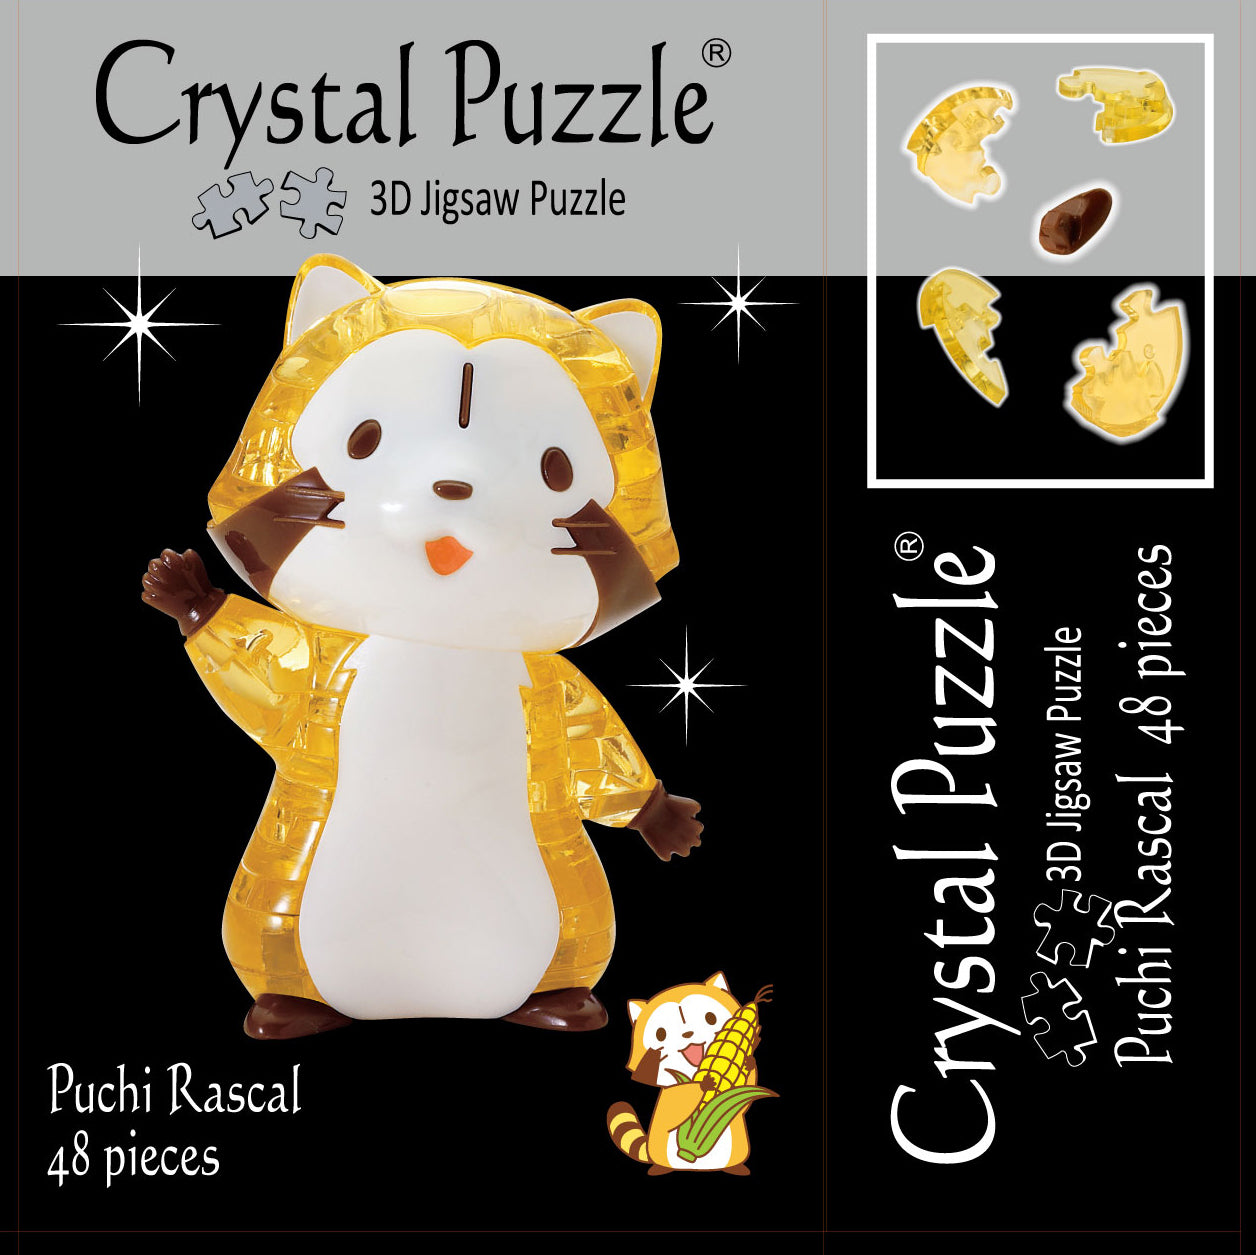 Puchi Rascal *Global shipping available* Dimension: 70mm x 50mm x 70mm Color: Gold/Brown Number of Pieces: 48 Weight: 130g